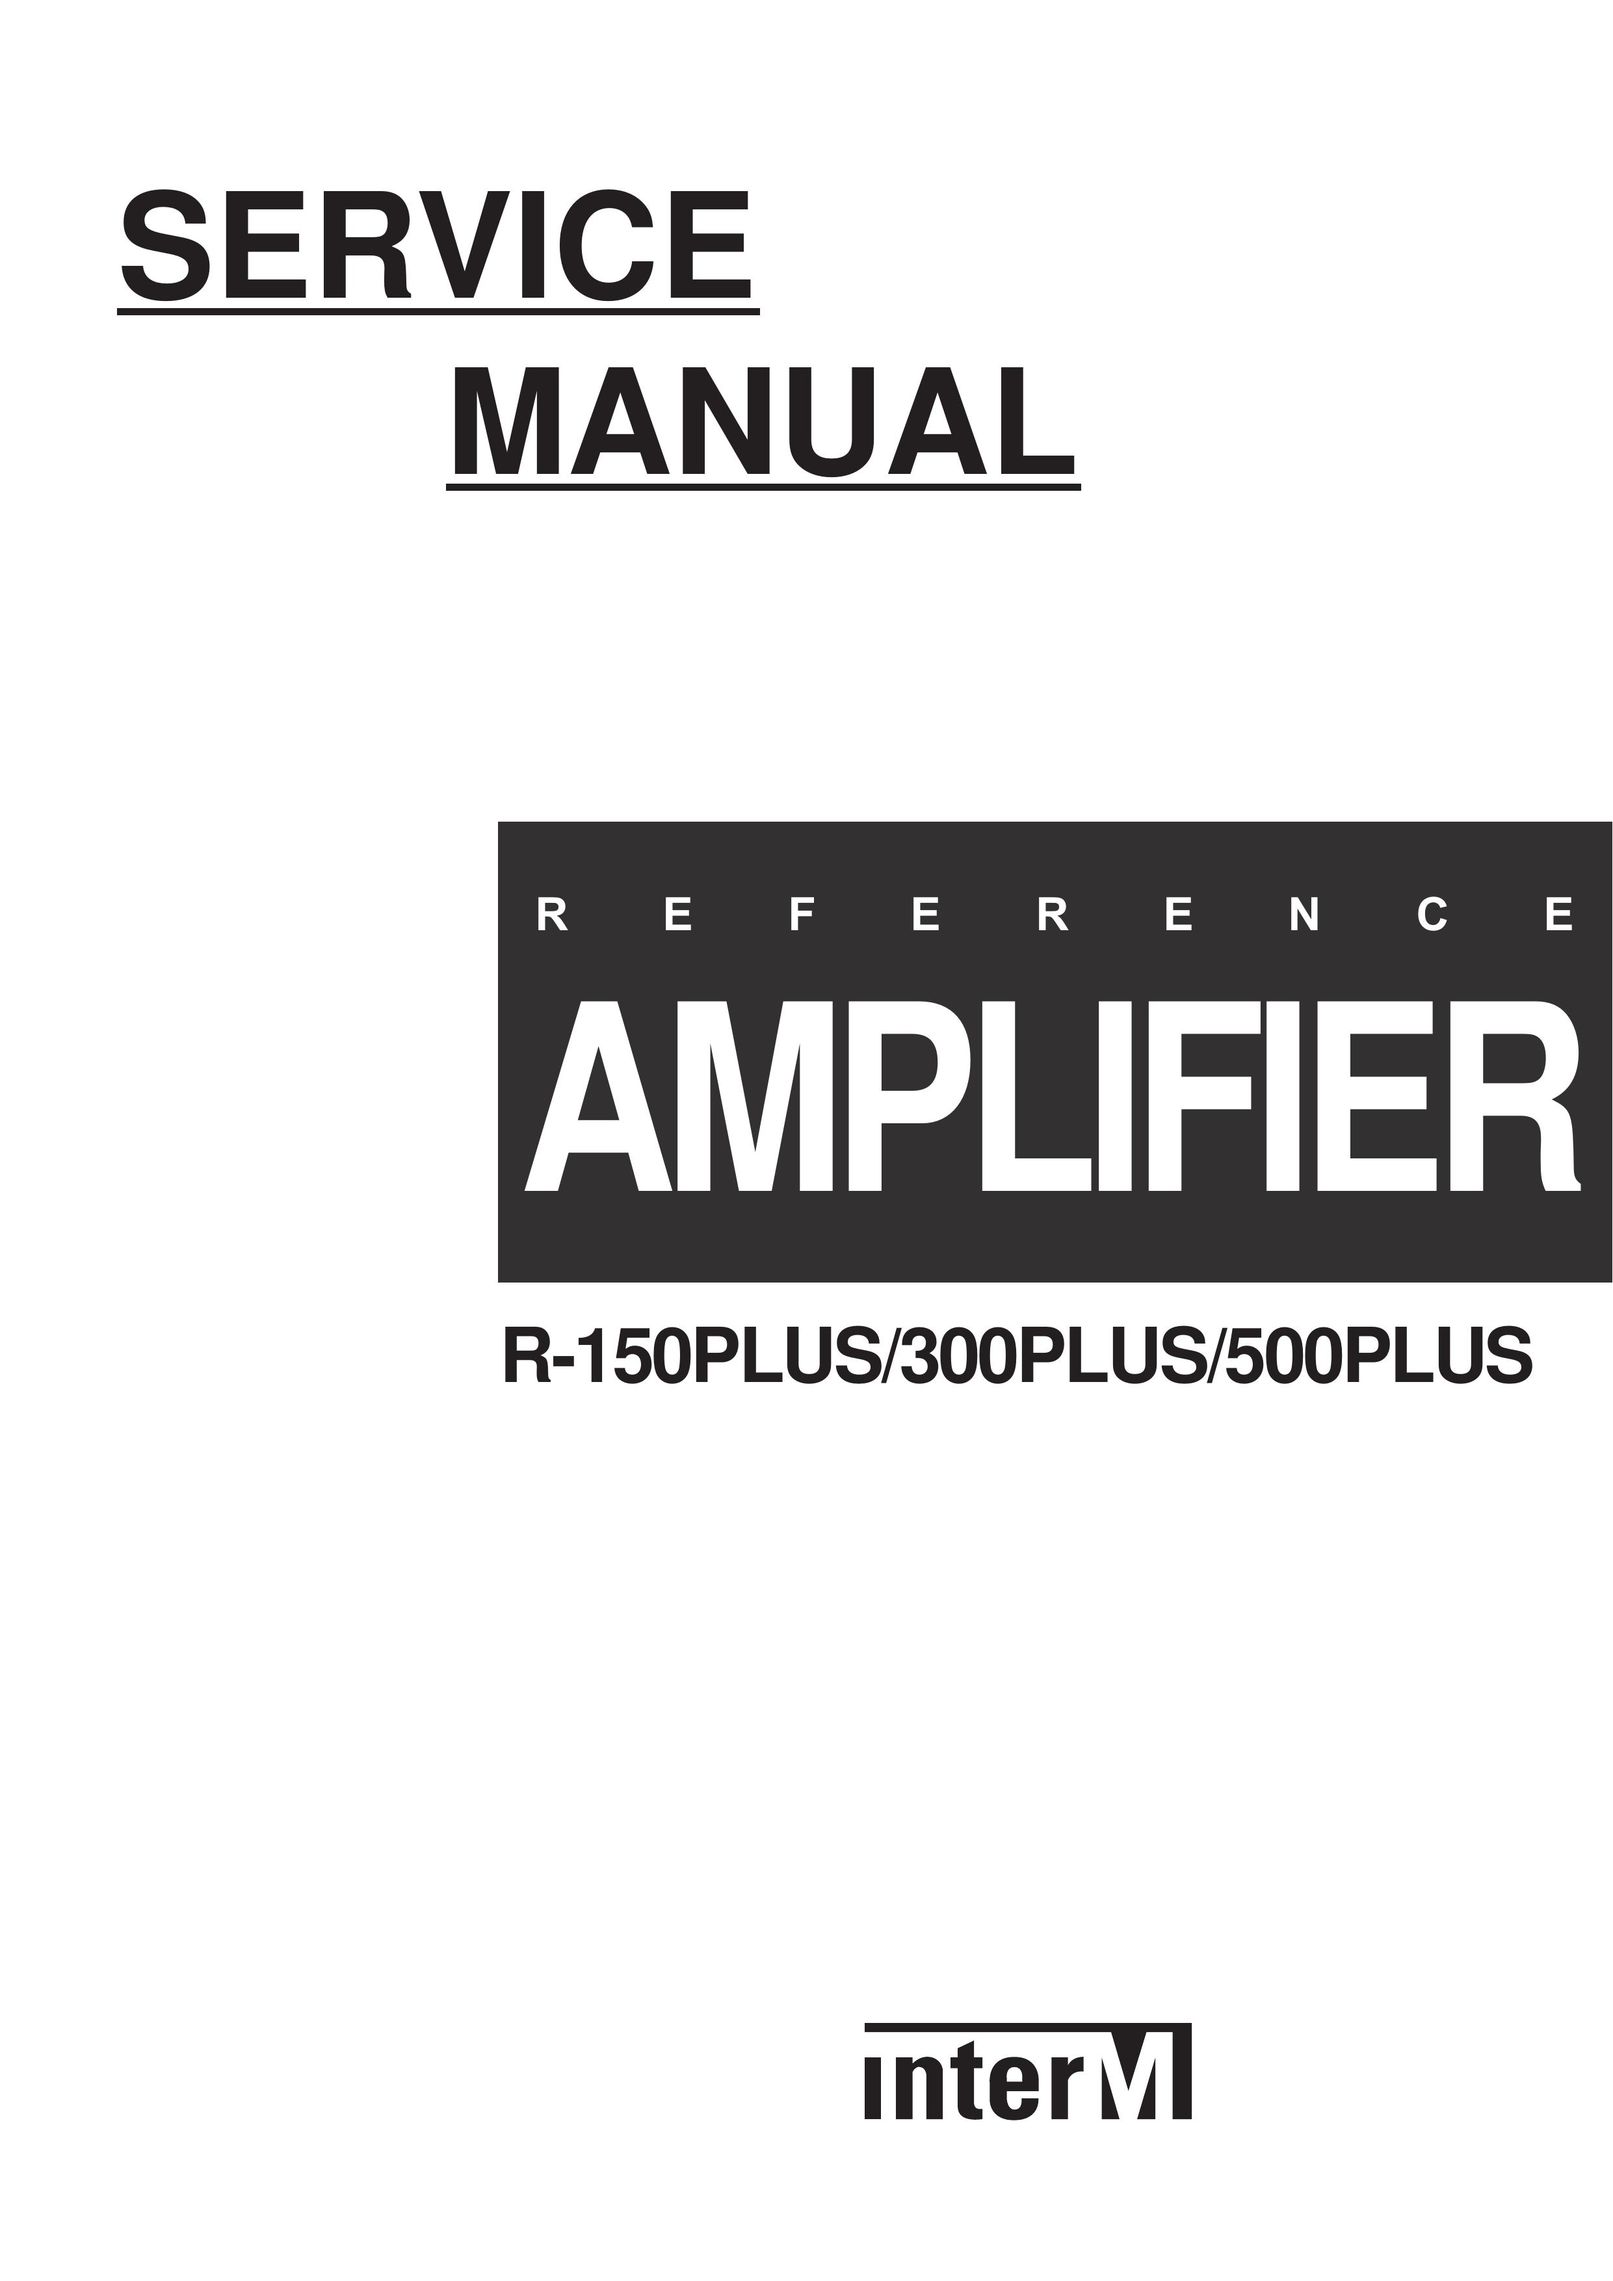 Macsense Connectivity 500PLUS Stereo Amplifier User Manual